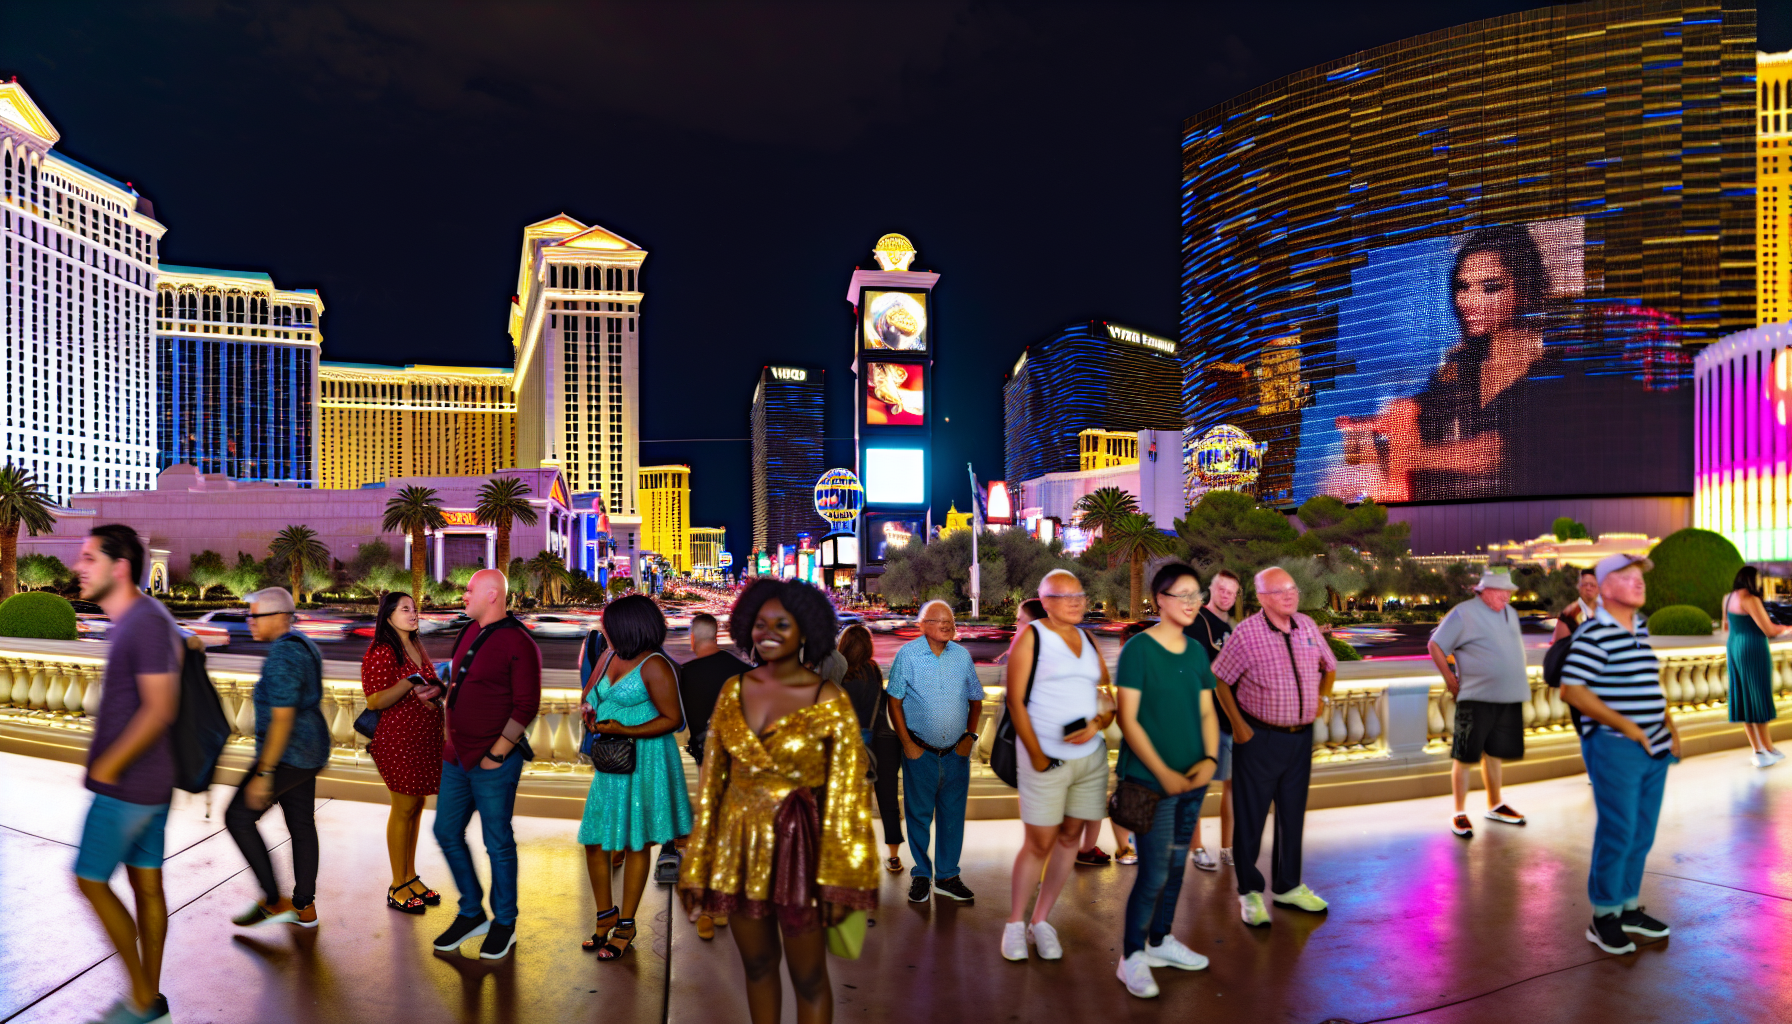 The dazzling lights and iconic landmarks of the Las Vegas Strip